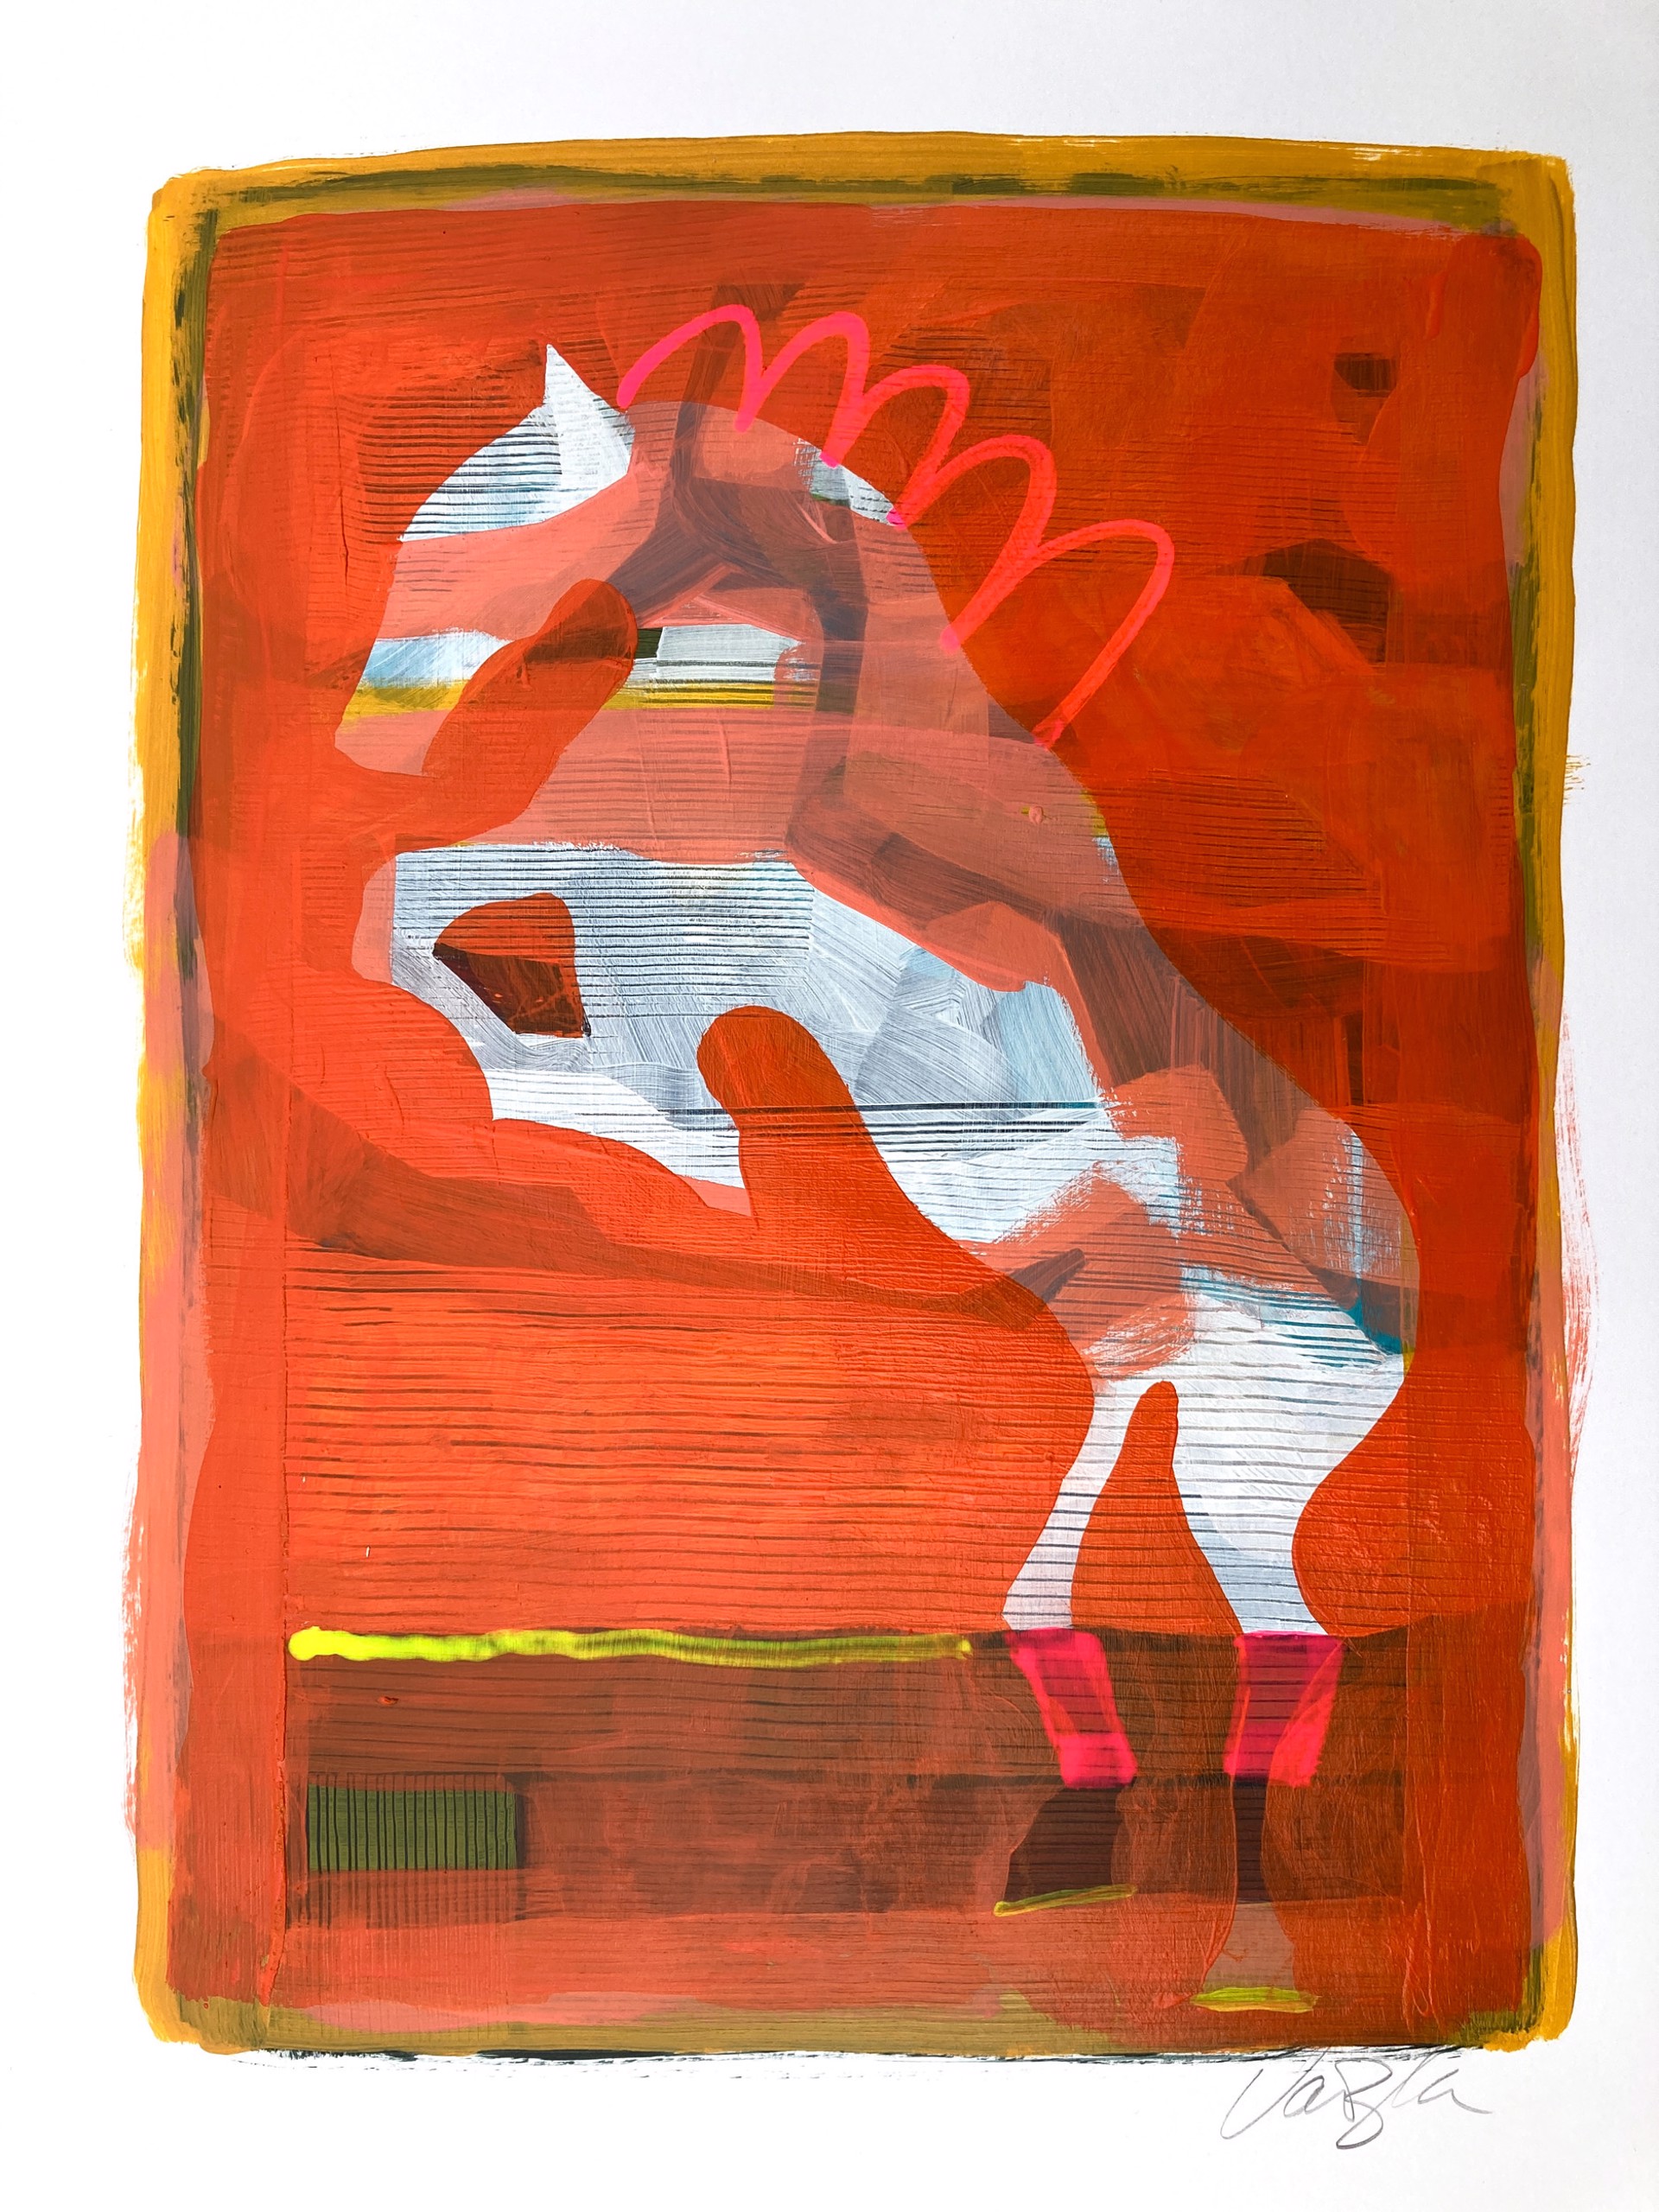 Rearing Horse with Pink Wraps by Rachael Van Dyke